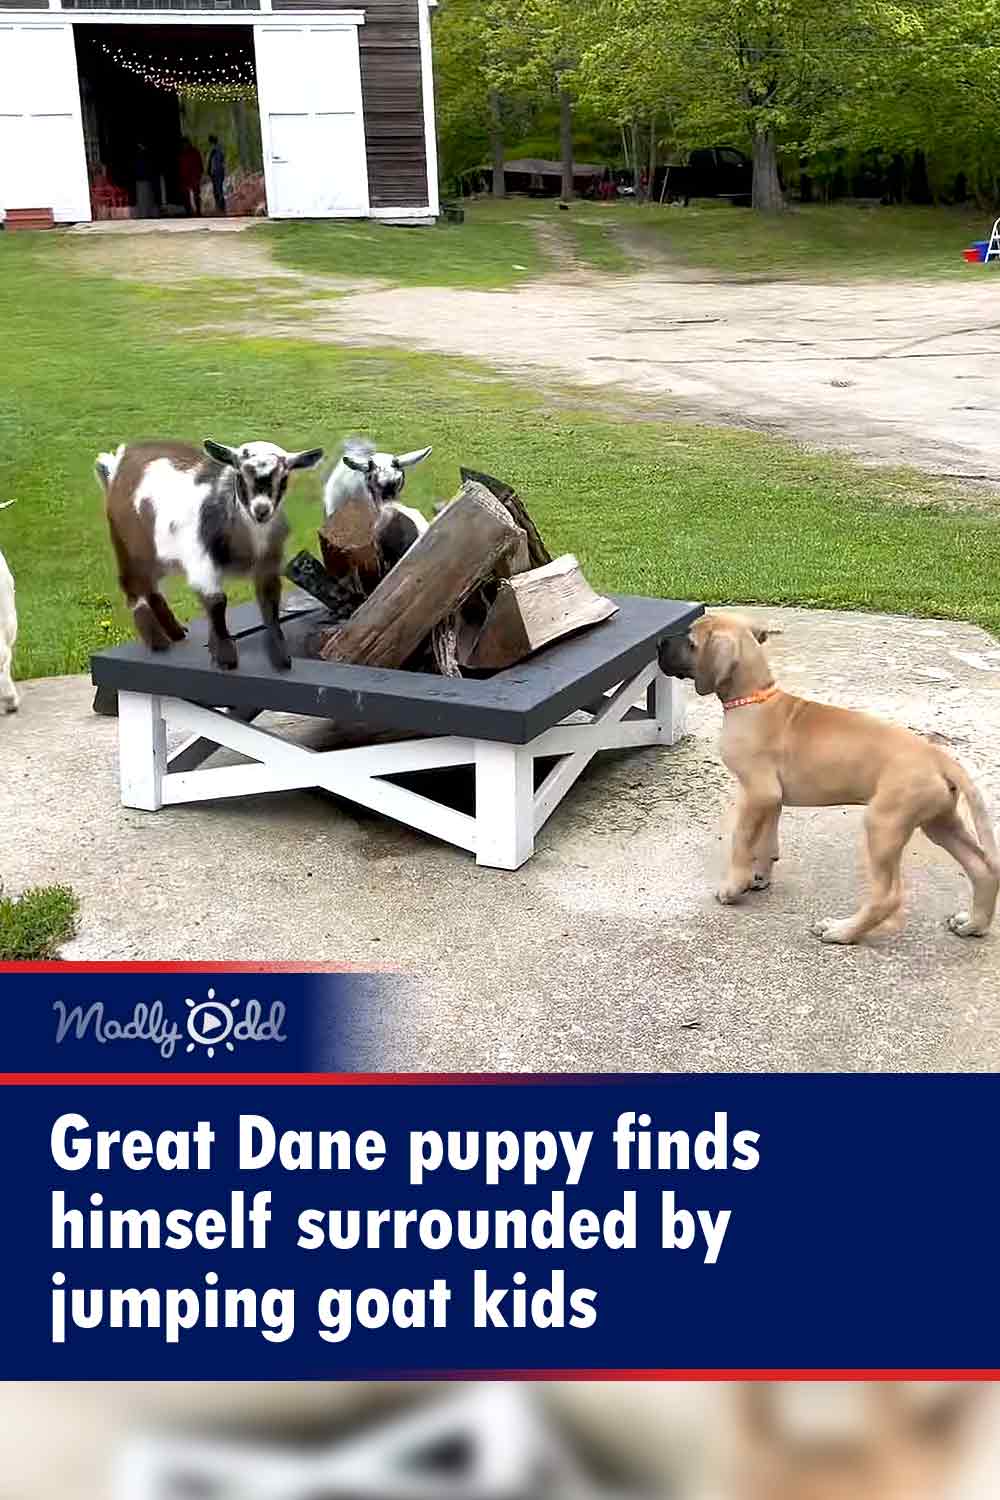 Great Dane puppy finds himself surrounded by jumping goat kids